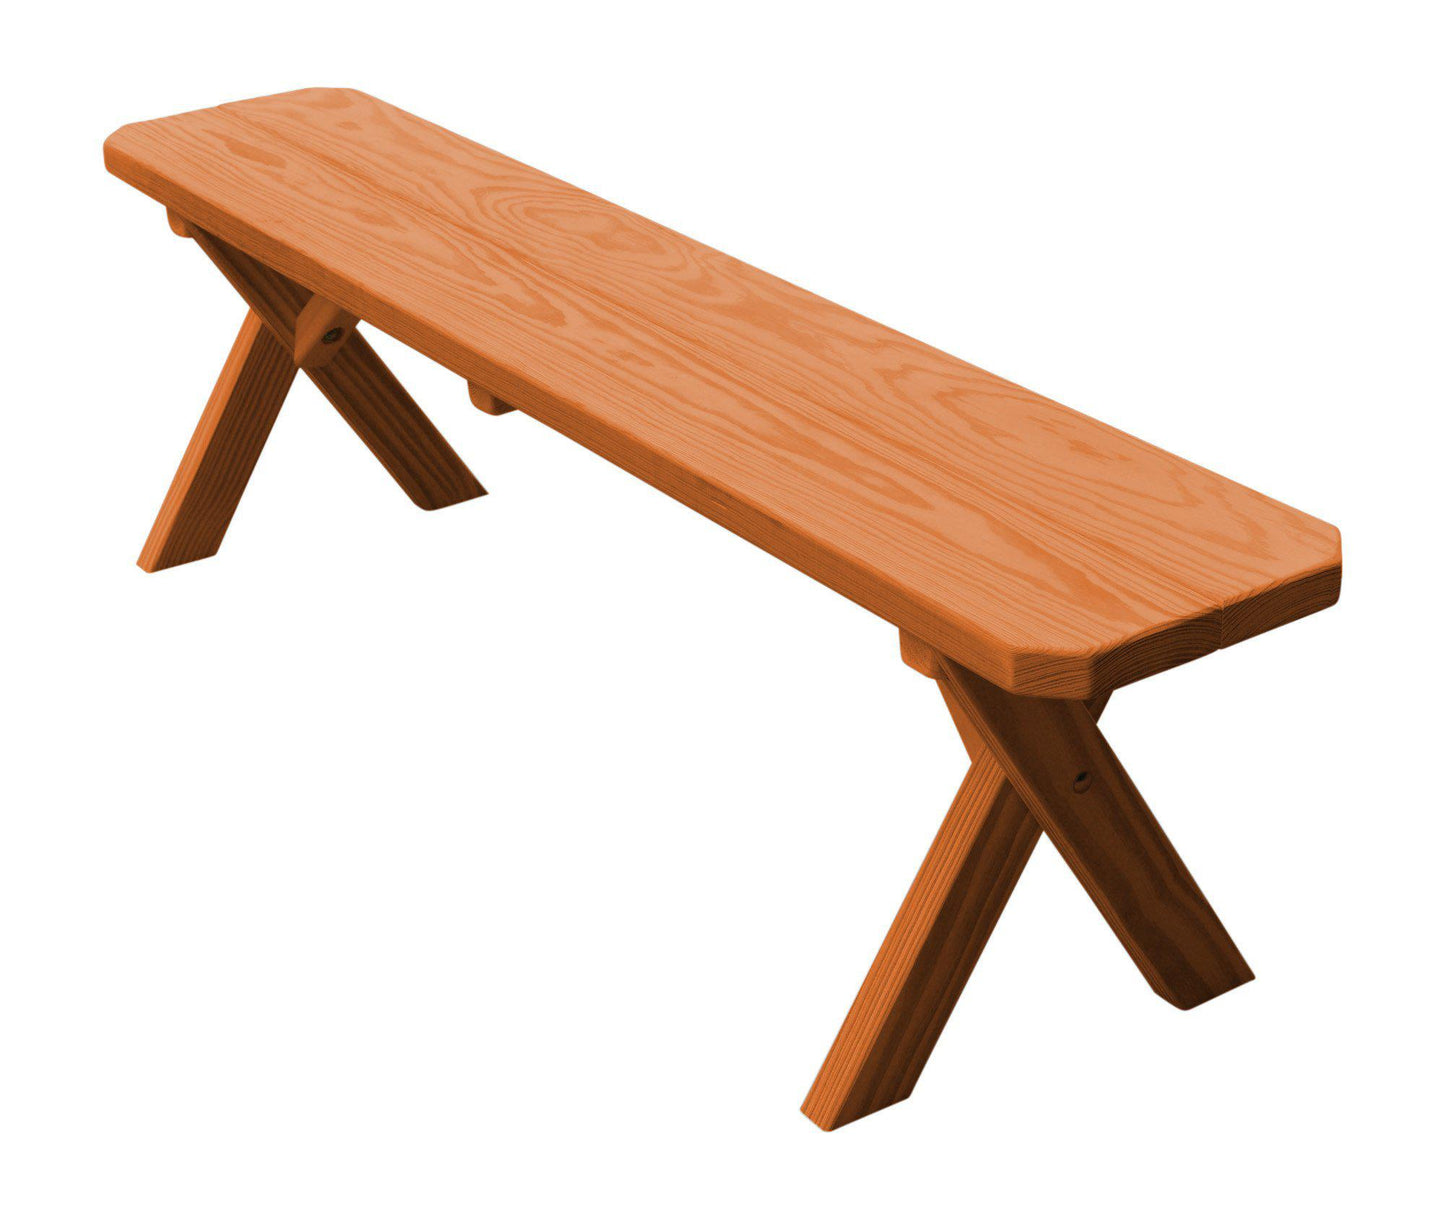 A&L Furniture Co. Pressure Treated Pine  55" Crossleg Bench Only - LEAD TIME TO SHIP 10 BUSINESS DAYS